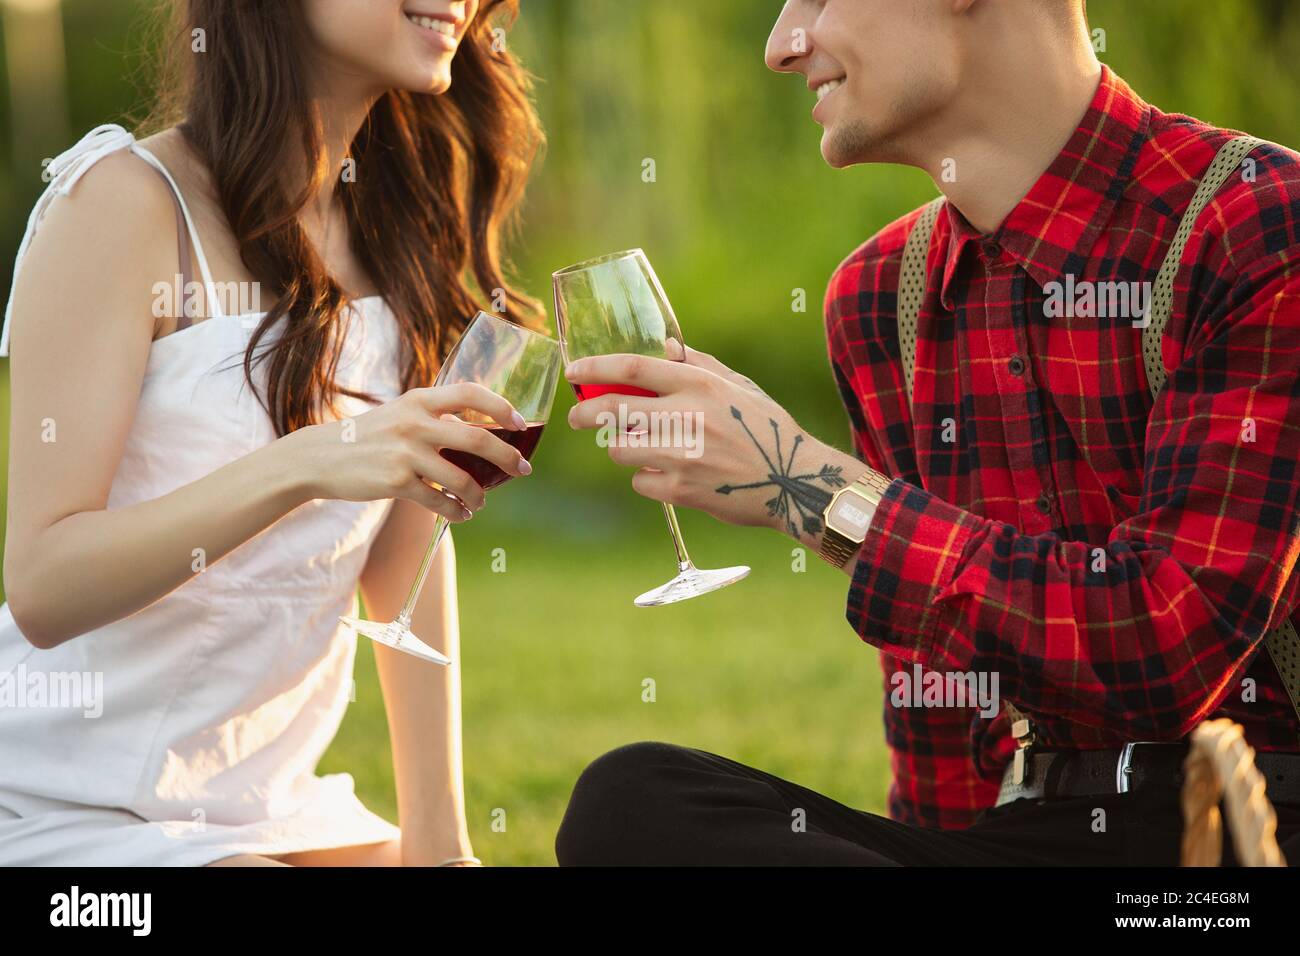 Clinking glasses. Caucasian young couple enjoying weekend together in the park on summer day. Look lovely, happy, cheerful. Concept of love, relationship, wellness, lifestyle. Sincere emotions. Stock Photo